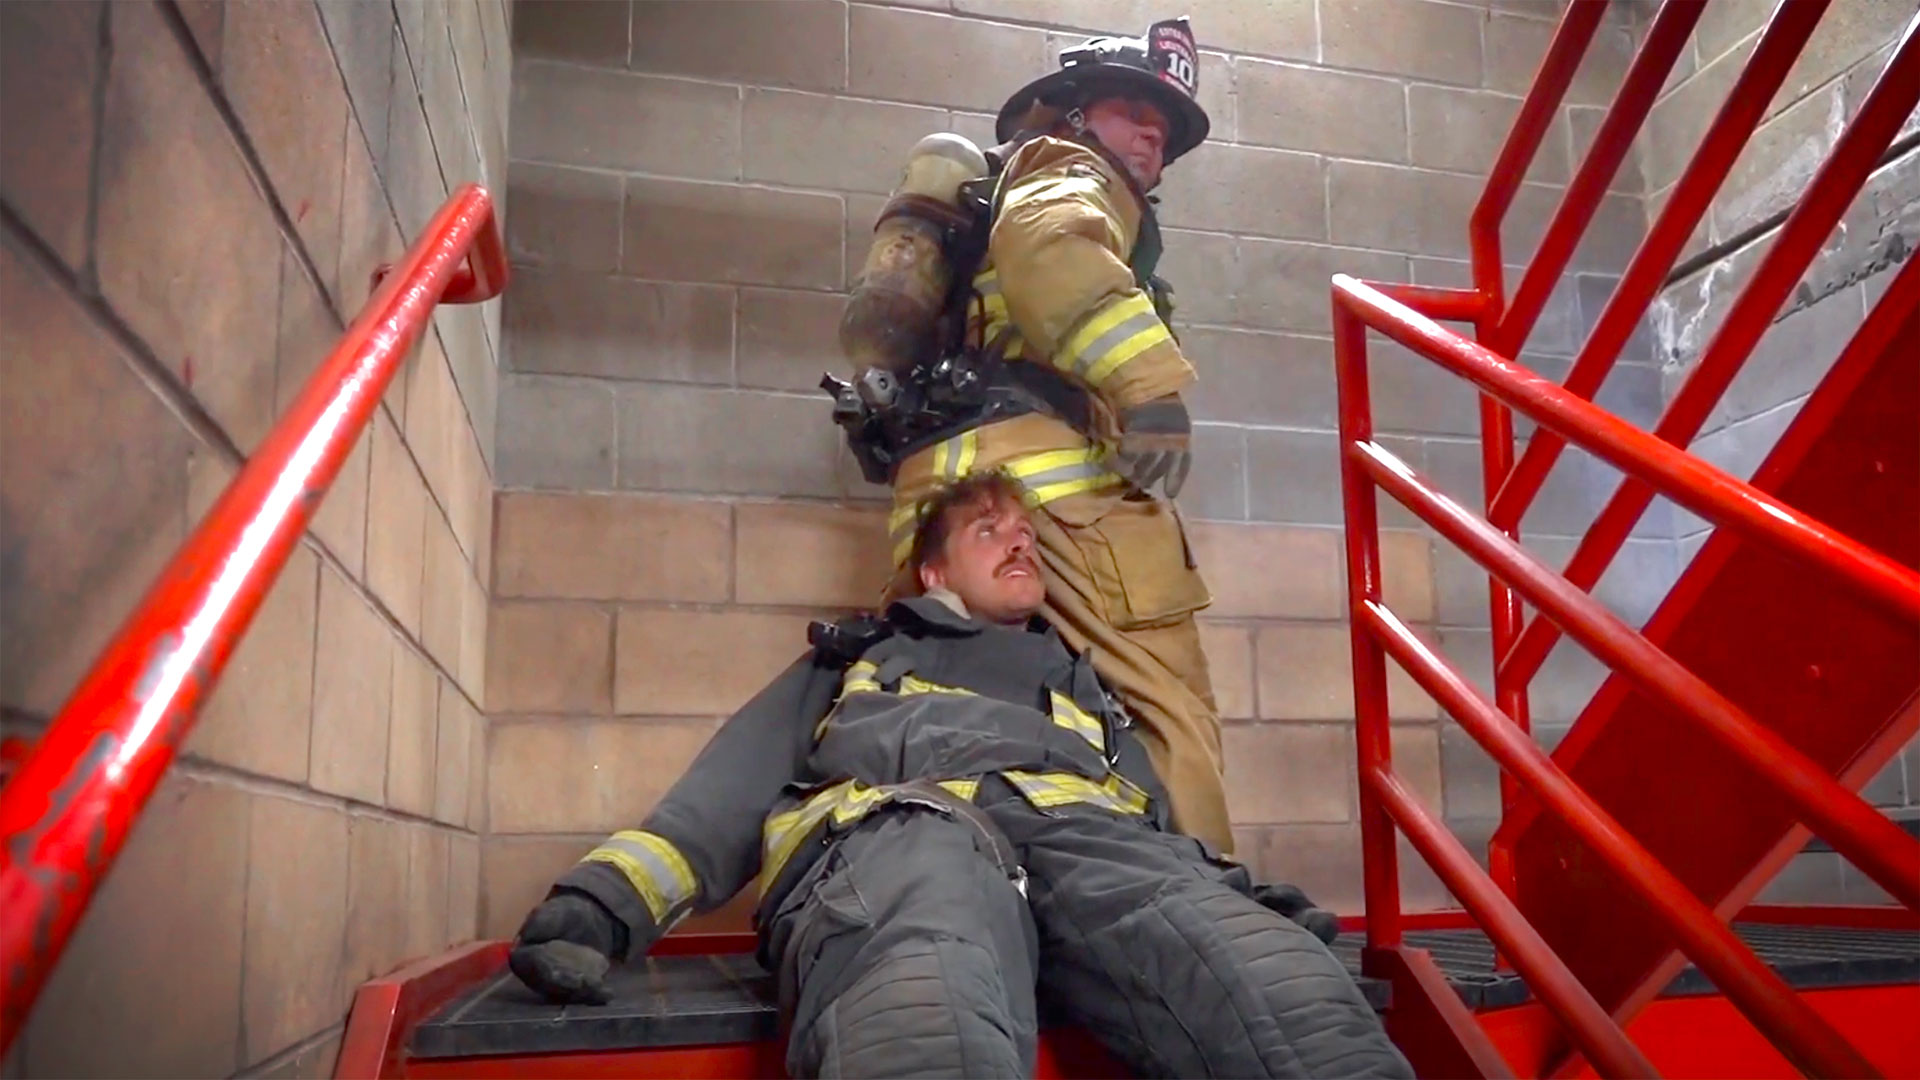 Featured image for “Stairwell Rescue Training Video in Honor of Firefighter Vinnie Fowler”